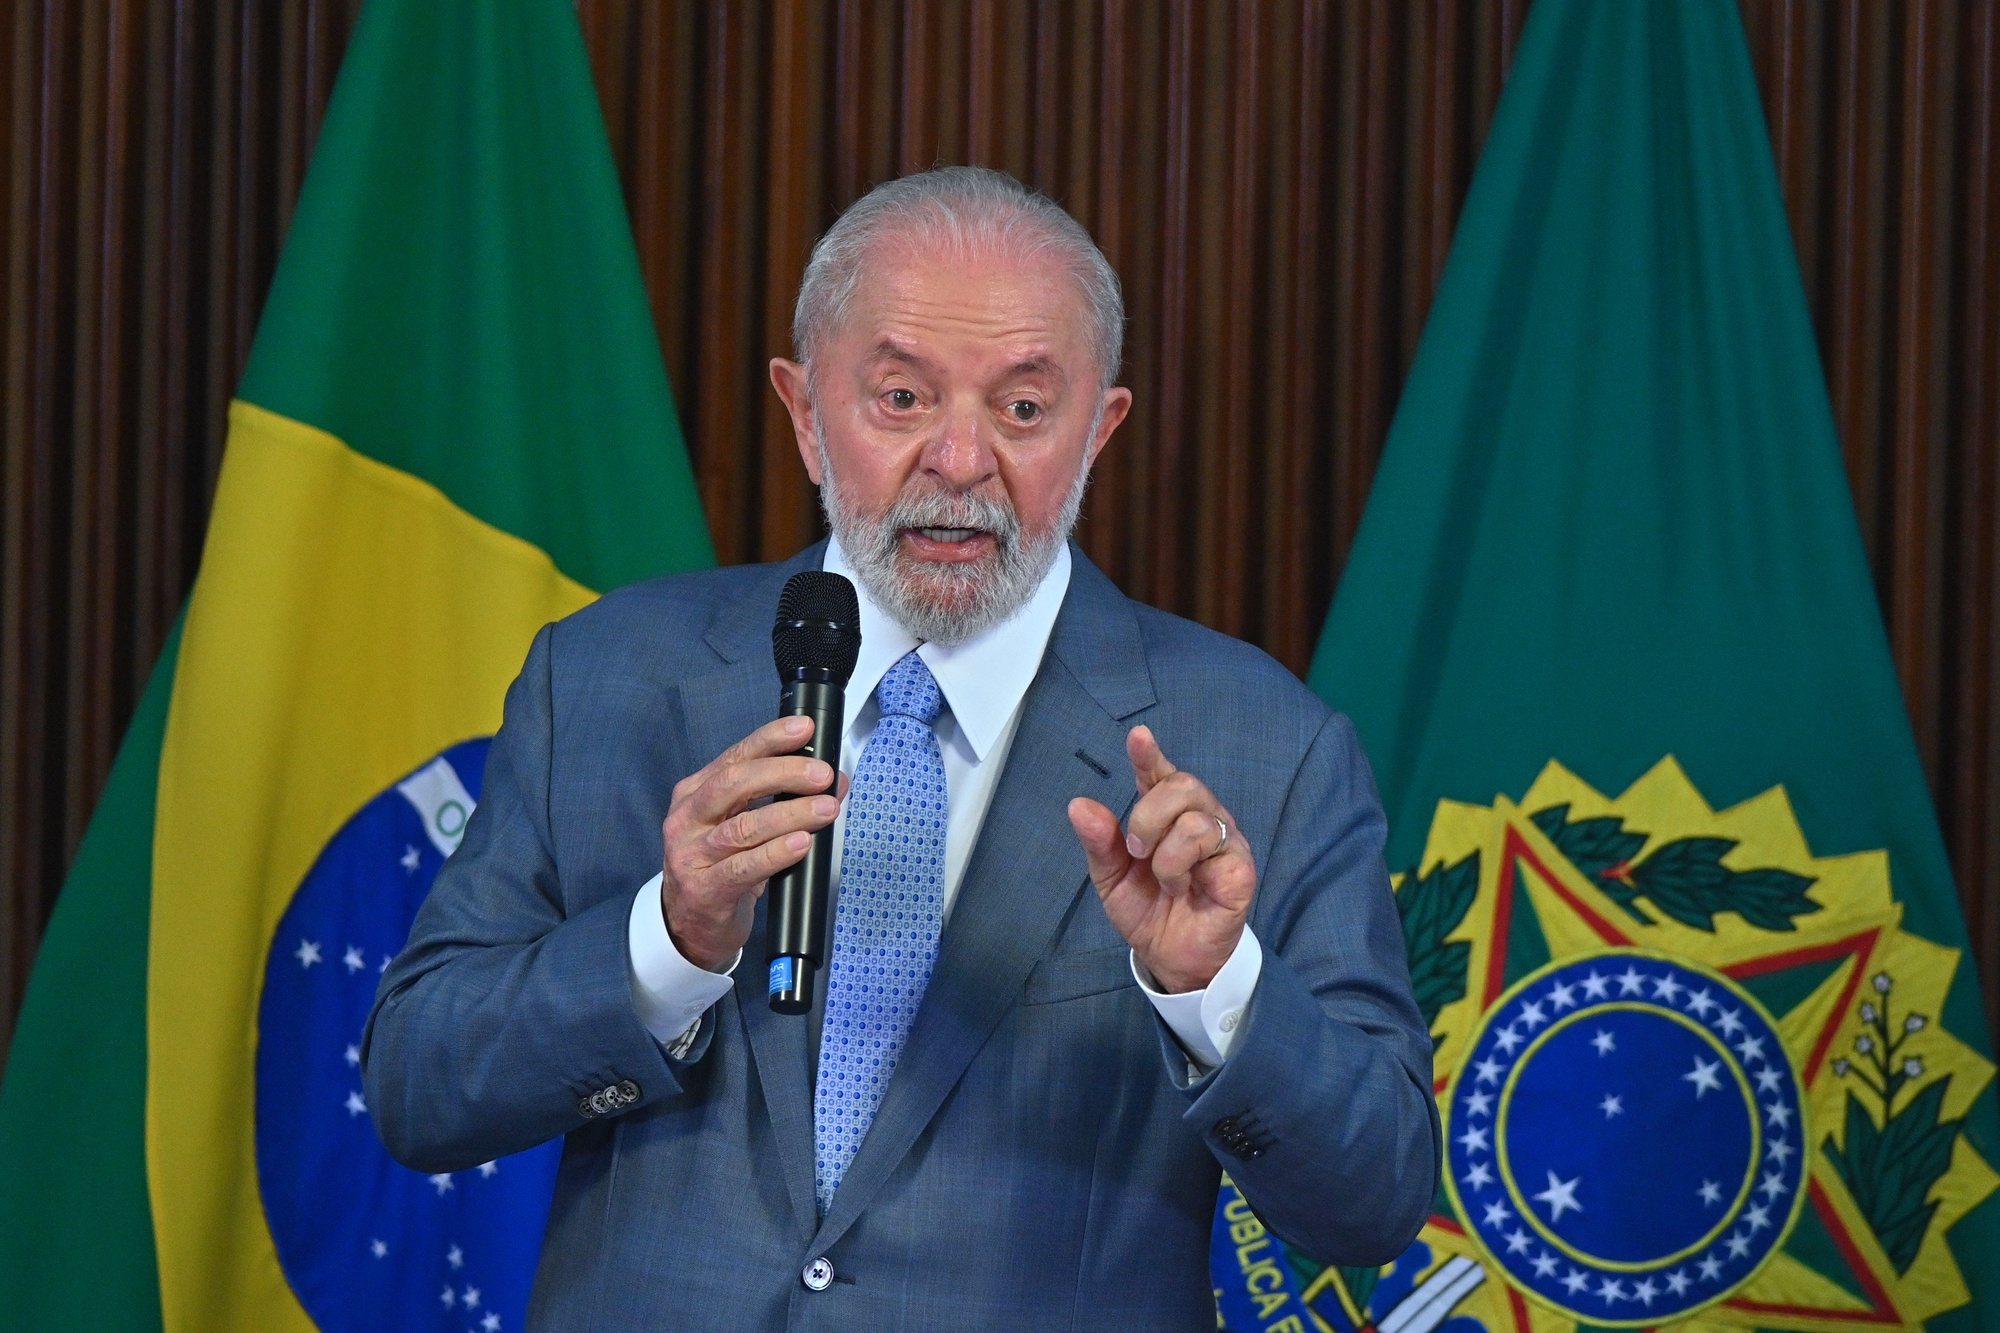 epa11228088 President of Brazil Luiz Inacio Lula da Silva speaks during a meeting with his cabinet of ministers at the Planalto Palace in Brasilia, Brazil, 18 March 2024. Lula called for the â€˜consolidationâ€™ of democracy in Brazil and expressed concern that his far-right predecessor, Jair Bolsonaro, had put the country at â€˜serious risk of a coupâ€™. Lula&#039;s statement came after two former commanders of the Armed Forces testified to the police that Bolsonaro had proposed a plan to annul the 2022 elections in order to remain in power.  EPA/ANDRE BORGES